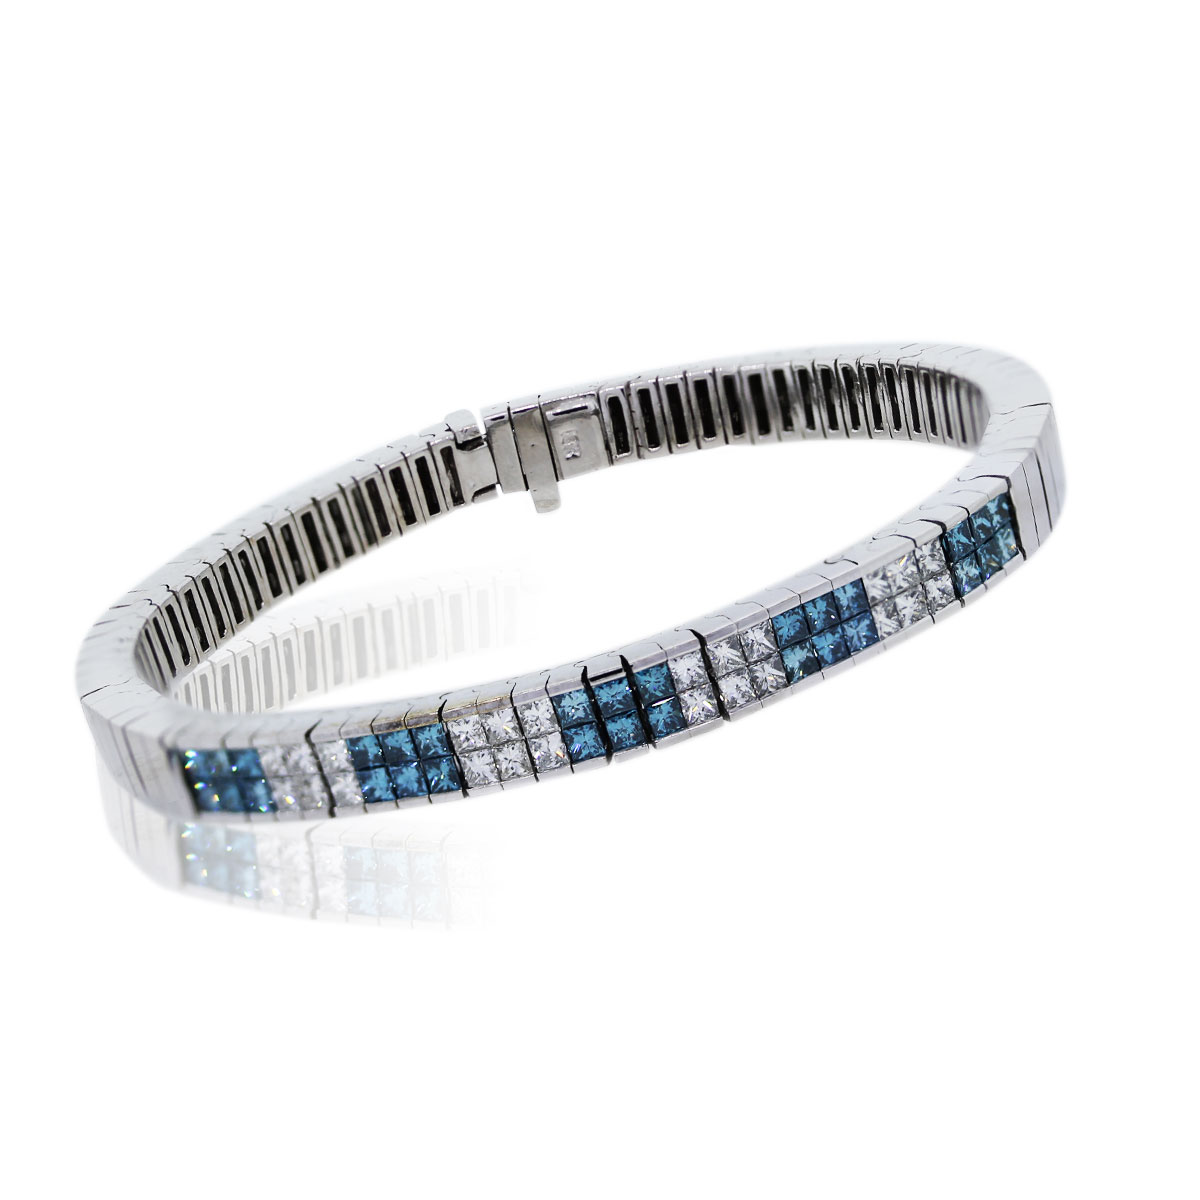 You are Viewing this Stunning Blue and White Diamond Bracelet!